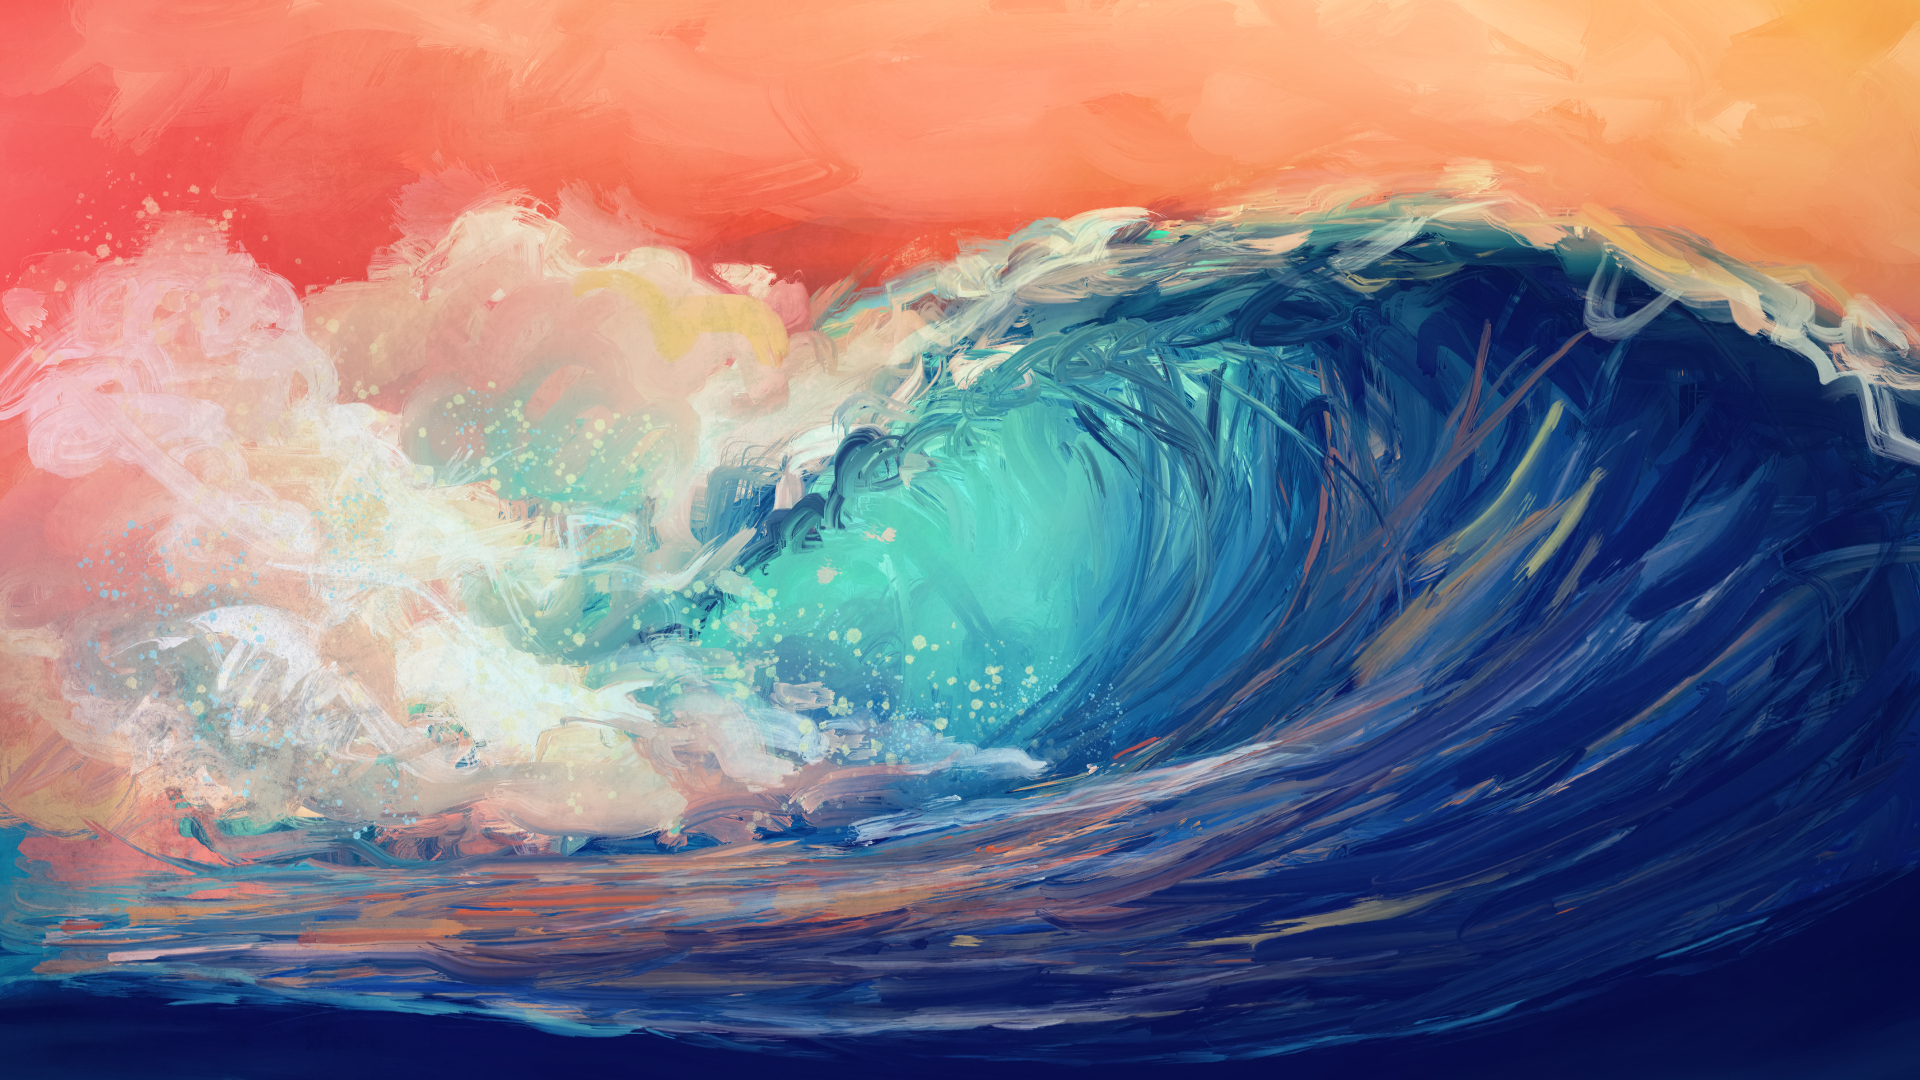 1920x1080 20+ Artistic Wave HD Wallpapers and Backgrounds